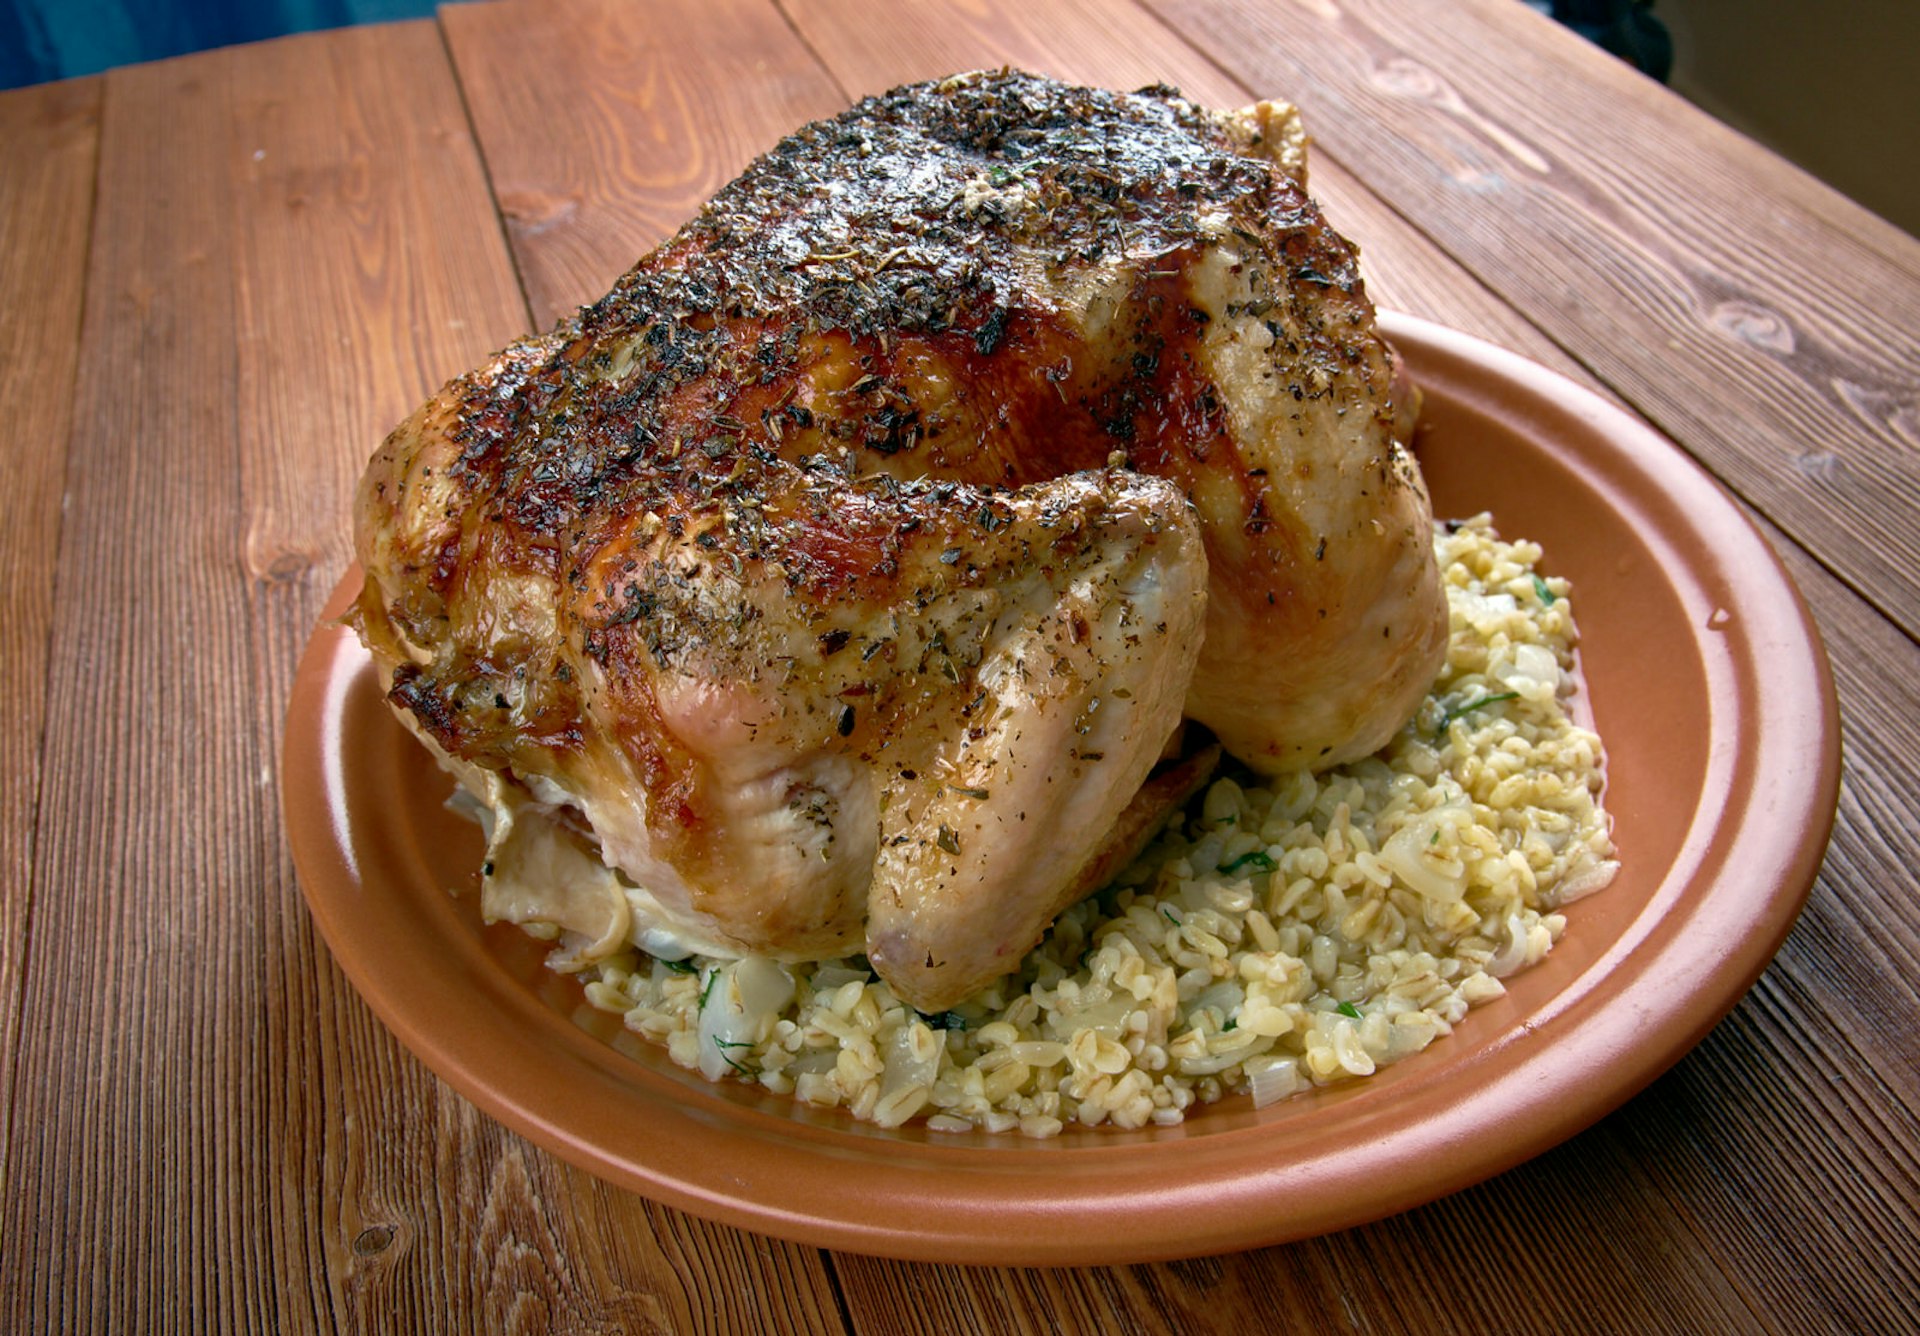 Plate of hamam mahshi, Egyptian braised squab stuffed with cracked wheat © Fanfo / Shutterstock